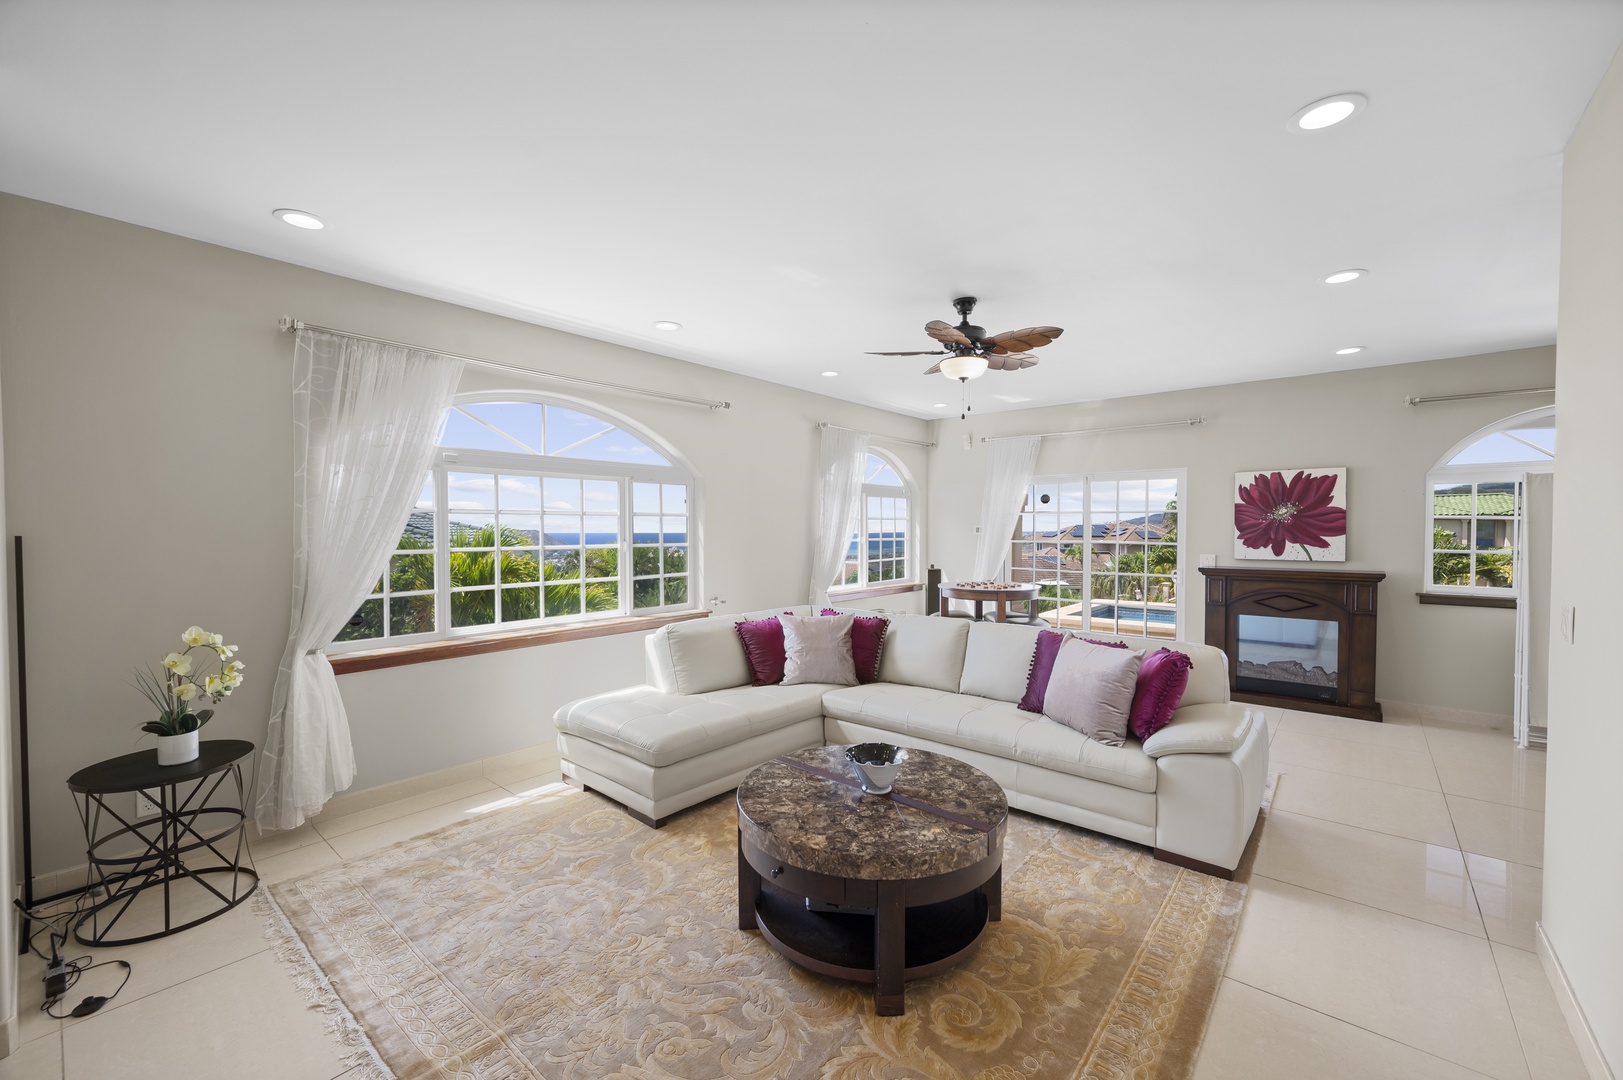 Honolulu Vacation Rentals, Lotus on a Hill* - Spacious living area with sofa and chaise lounge